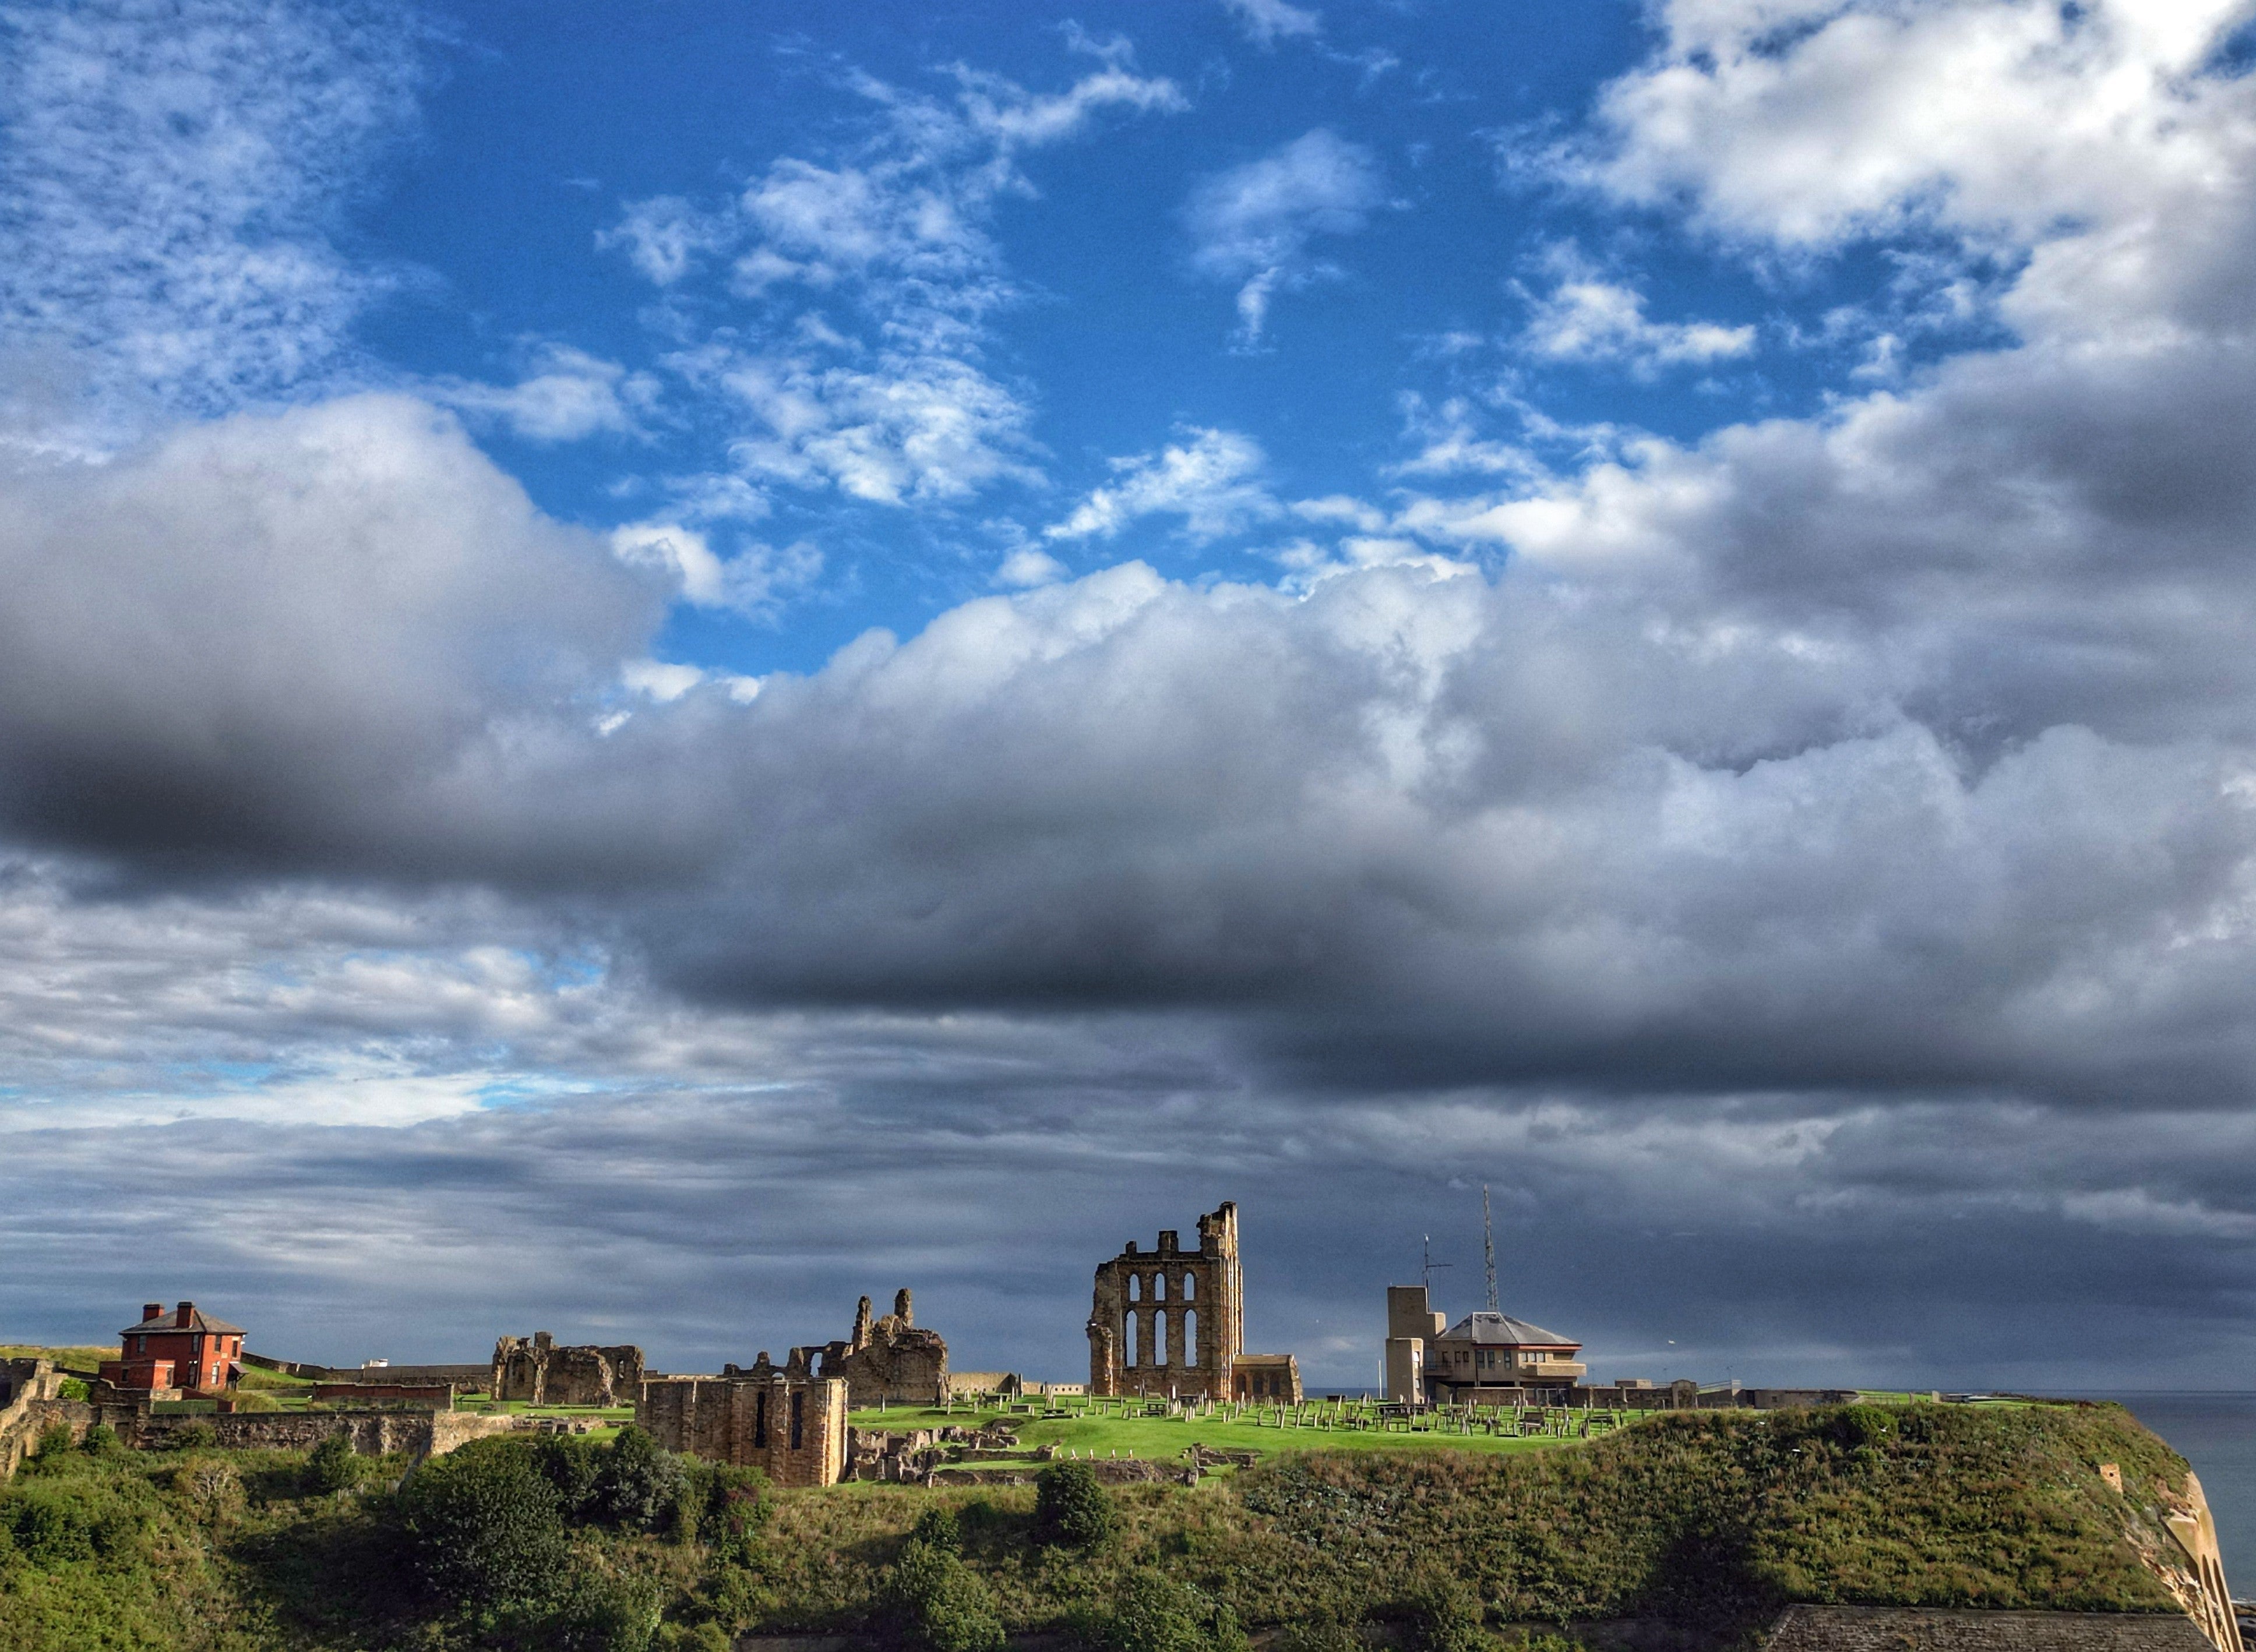 The alleged rape took place close to Tynemouth Priory and Castle on Sunday at around 3pm